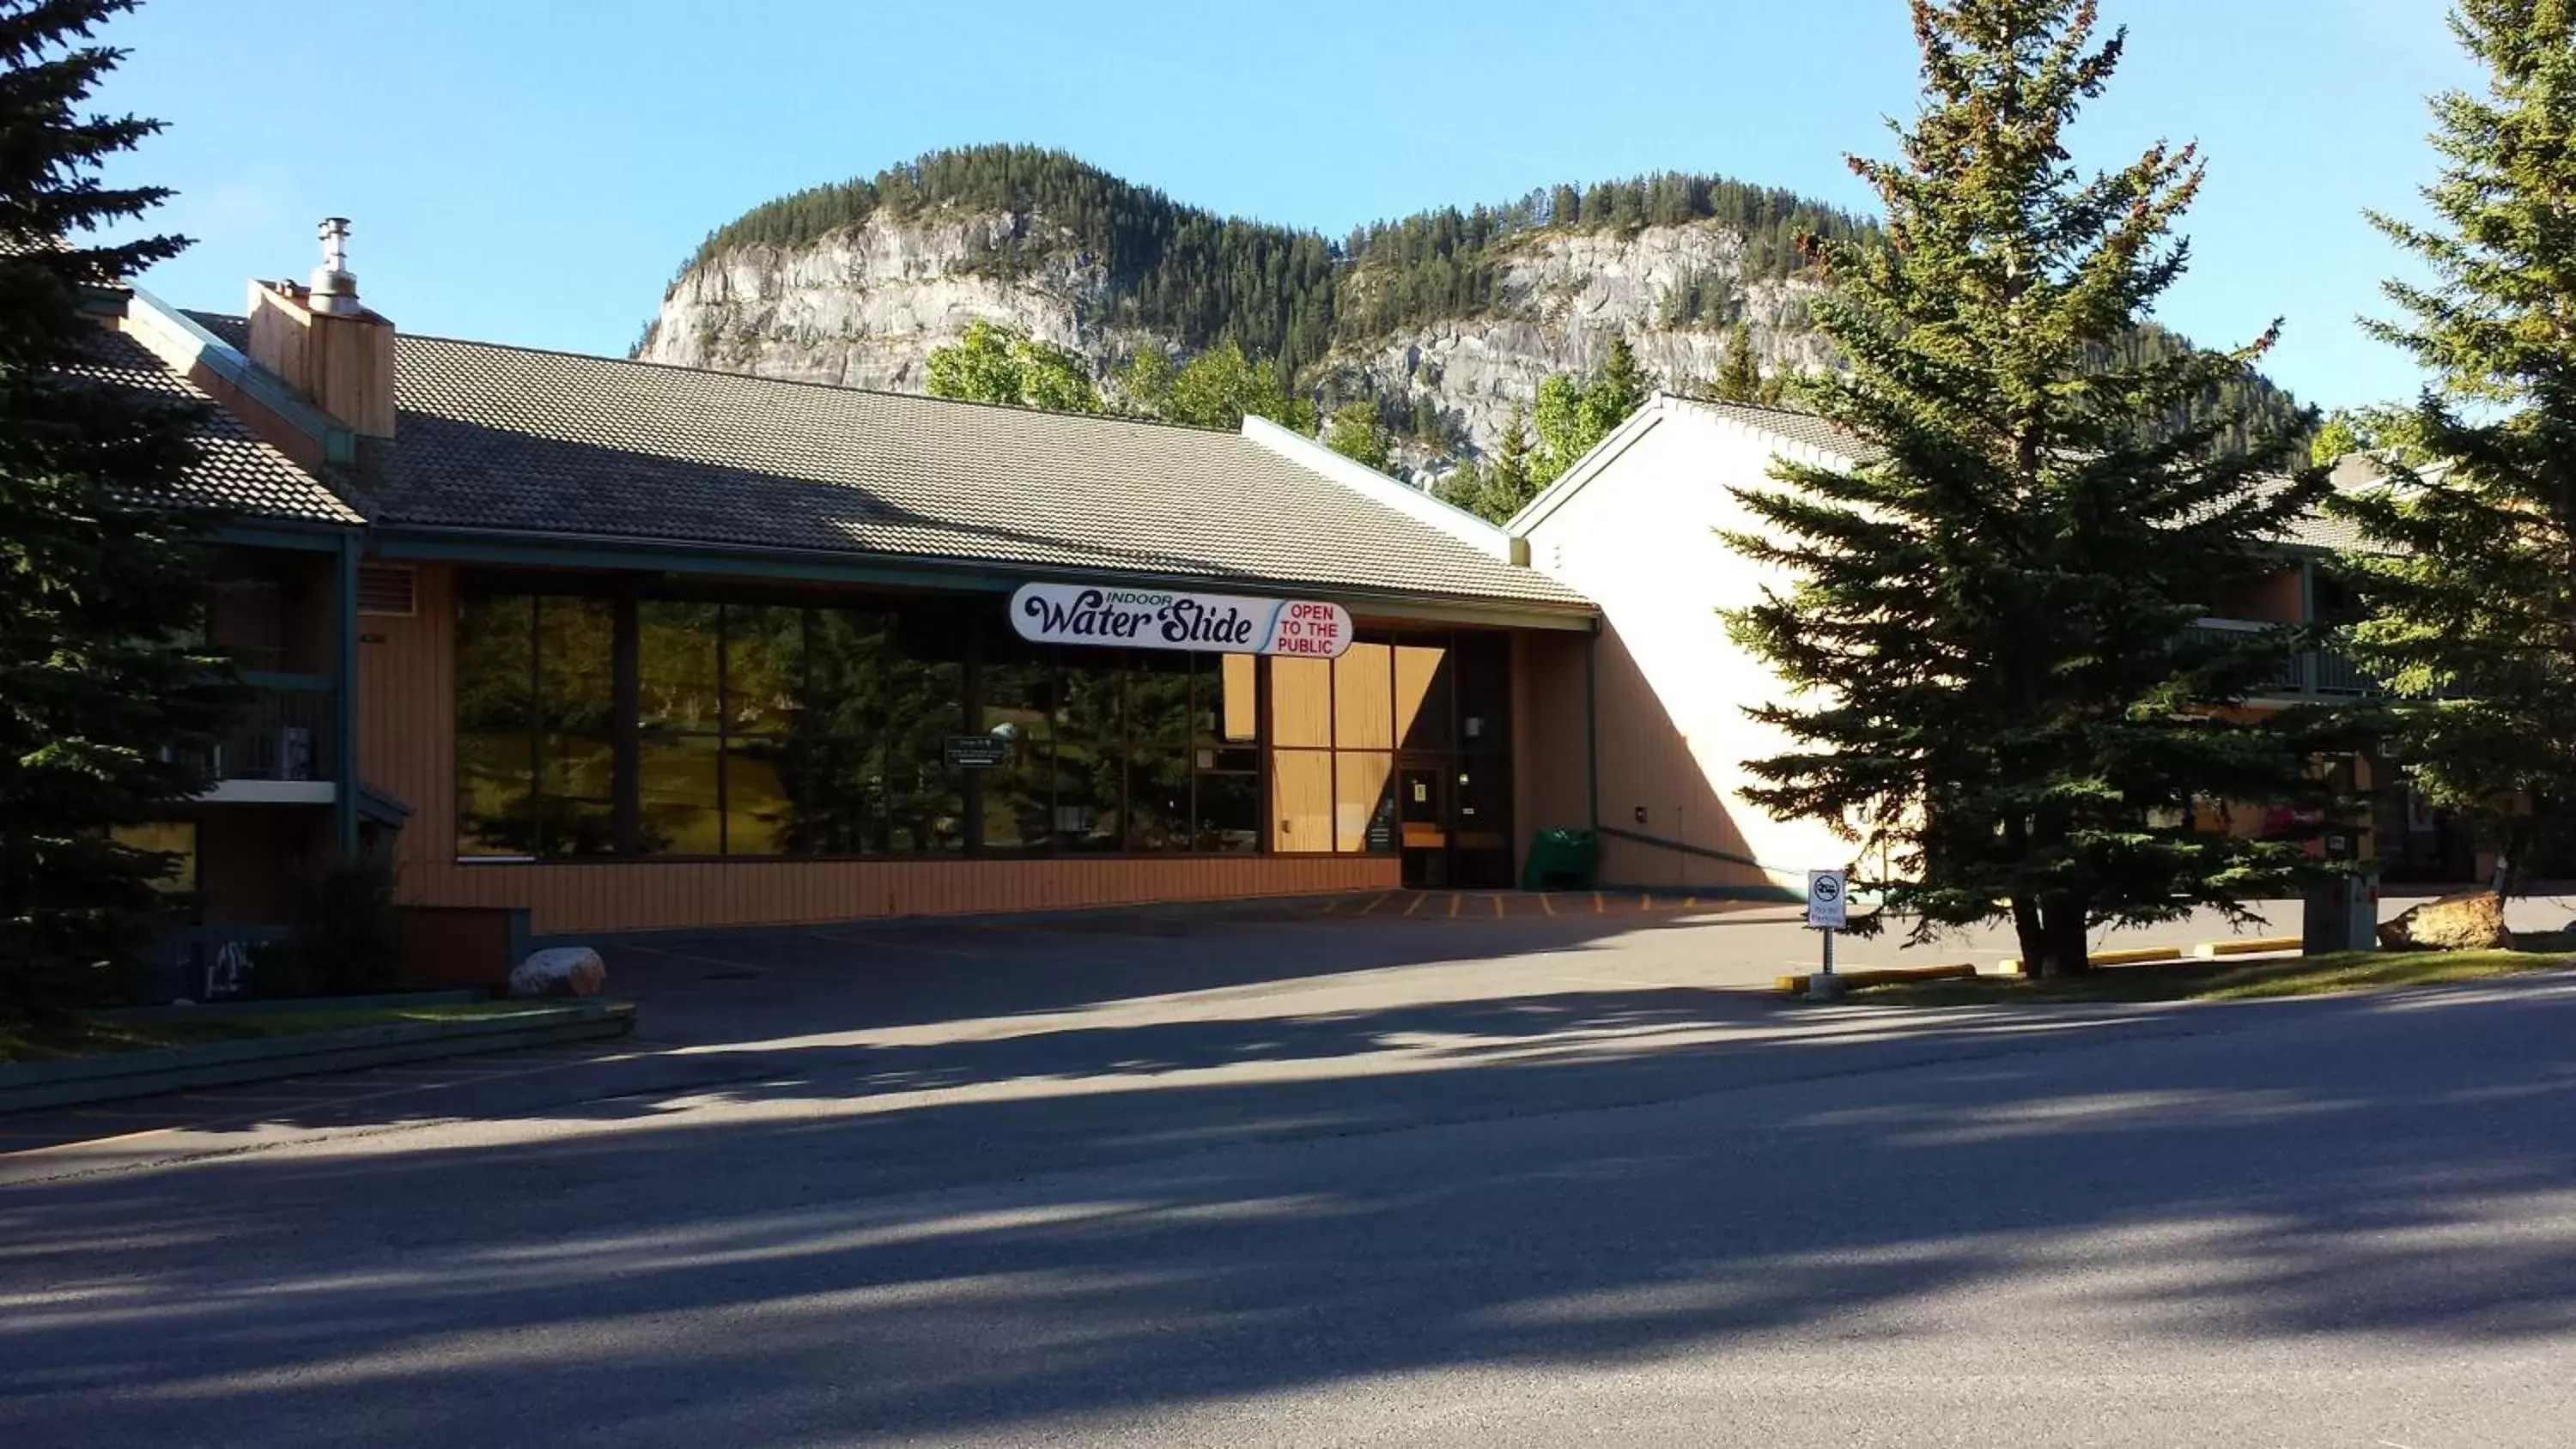 Area and facilities, Property Building in Douglas Fir Resort & Chalets